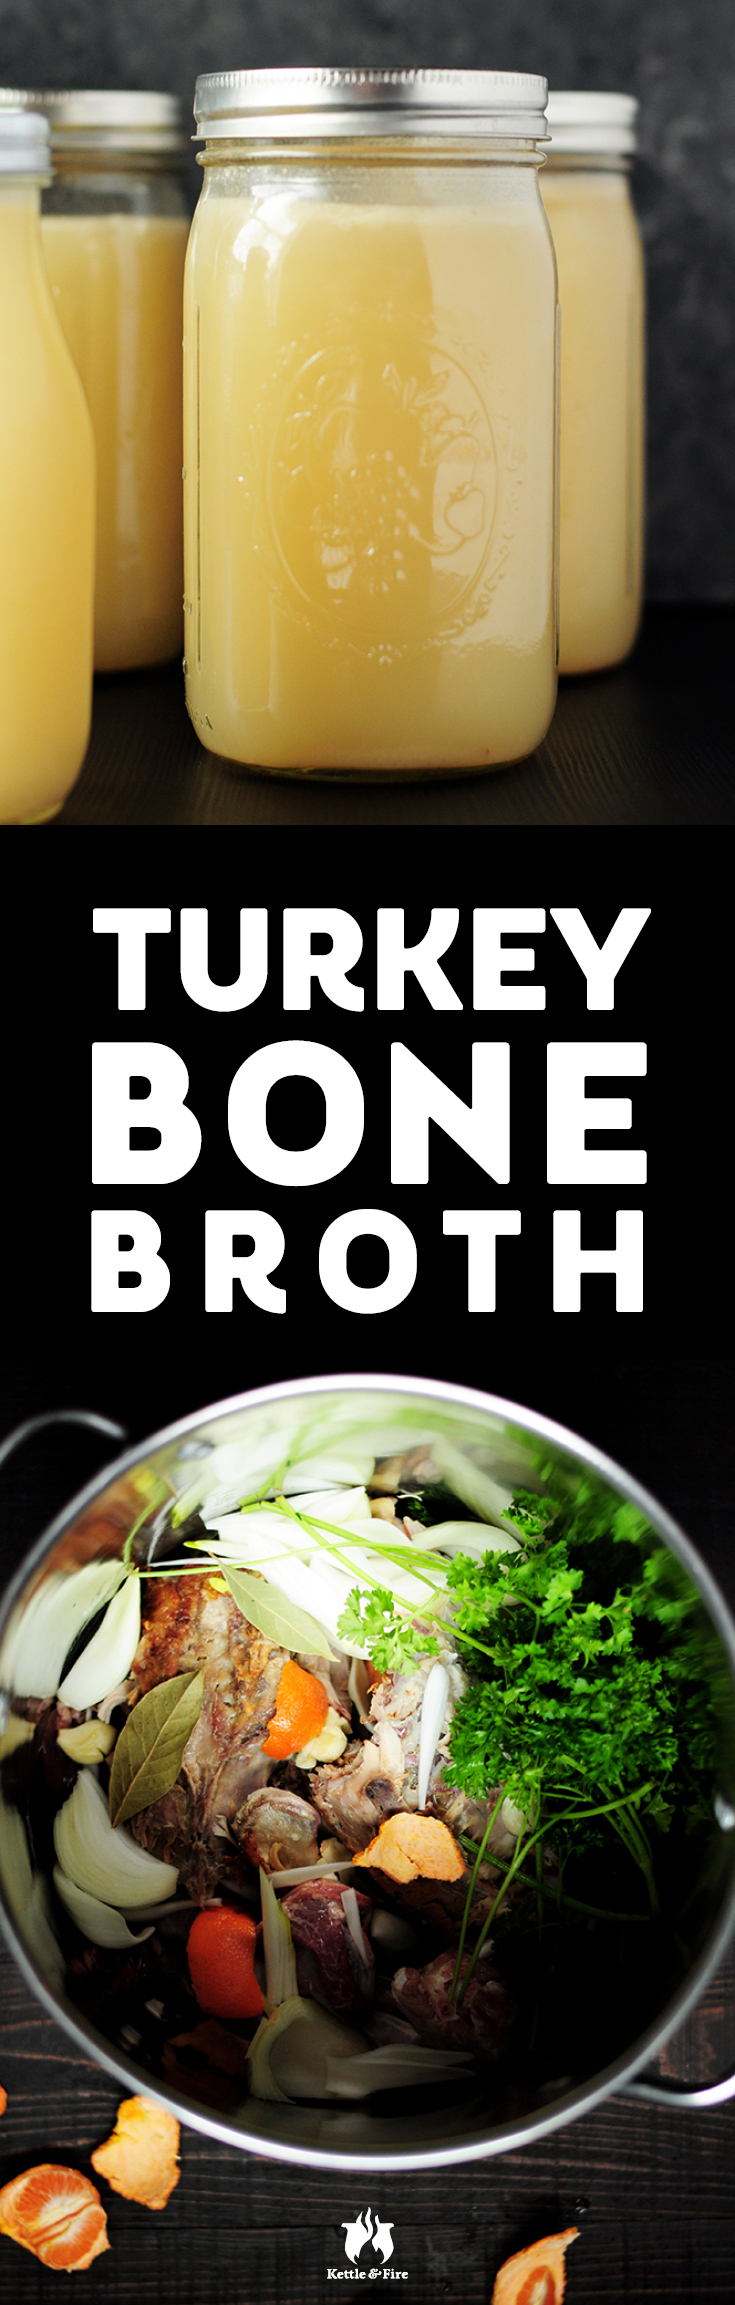 This is a savory turkey bone broth you can make from the carcass of a roasted turkey. Make it in advance and store it to use in meals, soups, and stews.